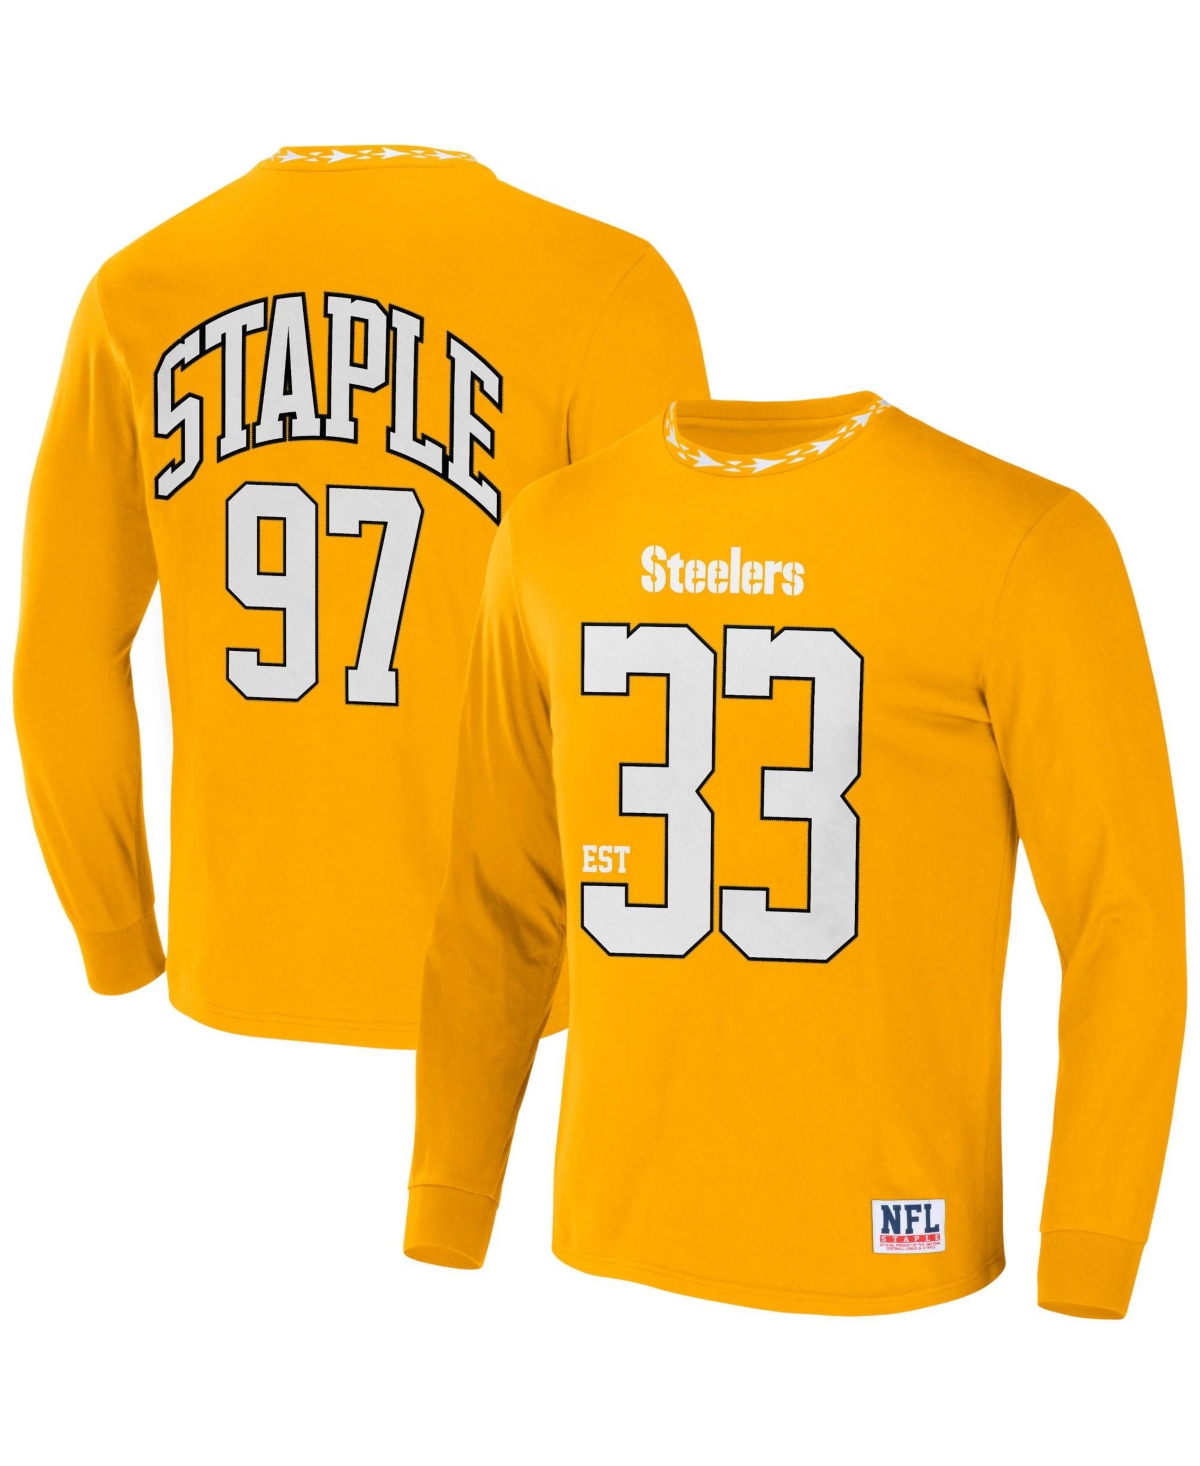 Men's Nfl X Staple Yellow Pittsburgh Steelers Core Long Sleeve Jersey Style T-shirt - Yellow